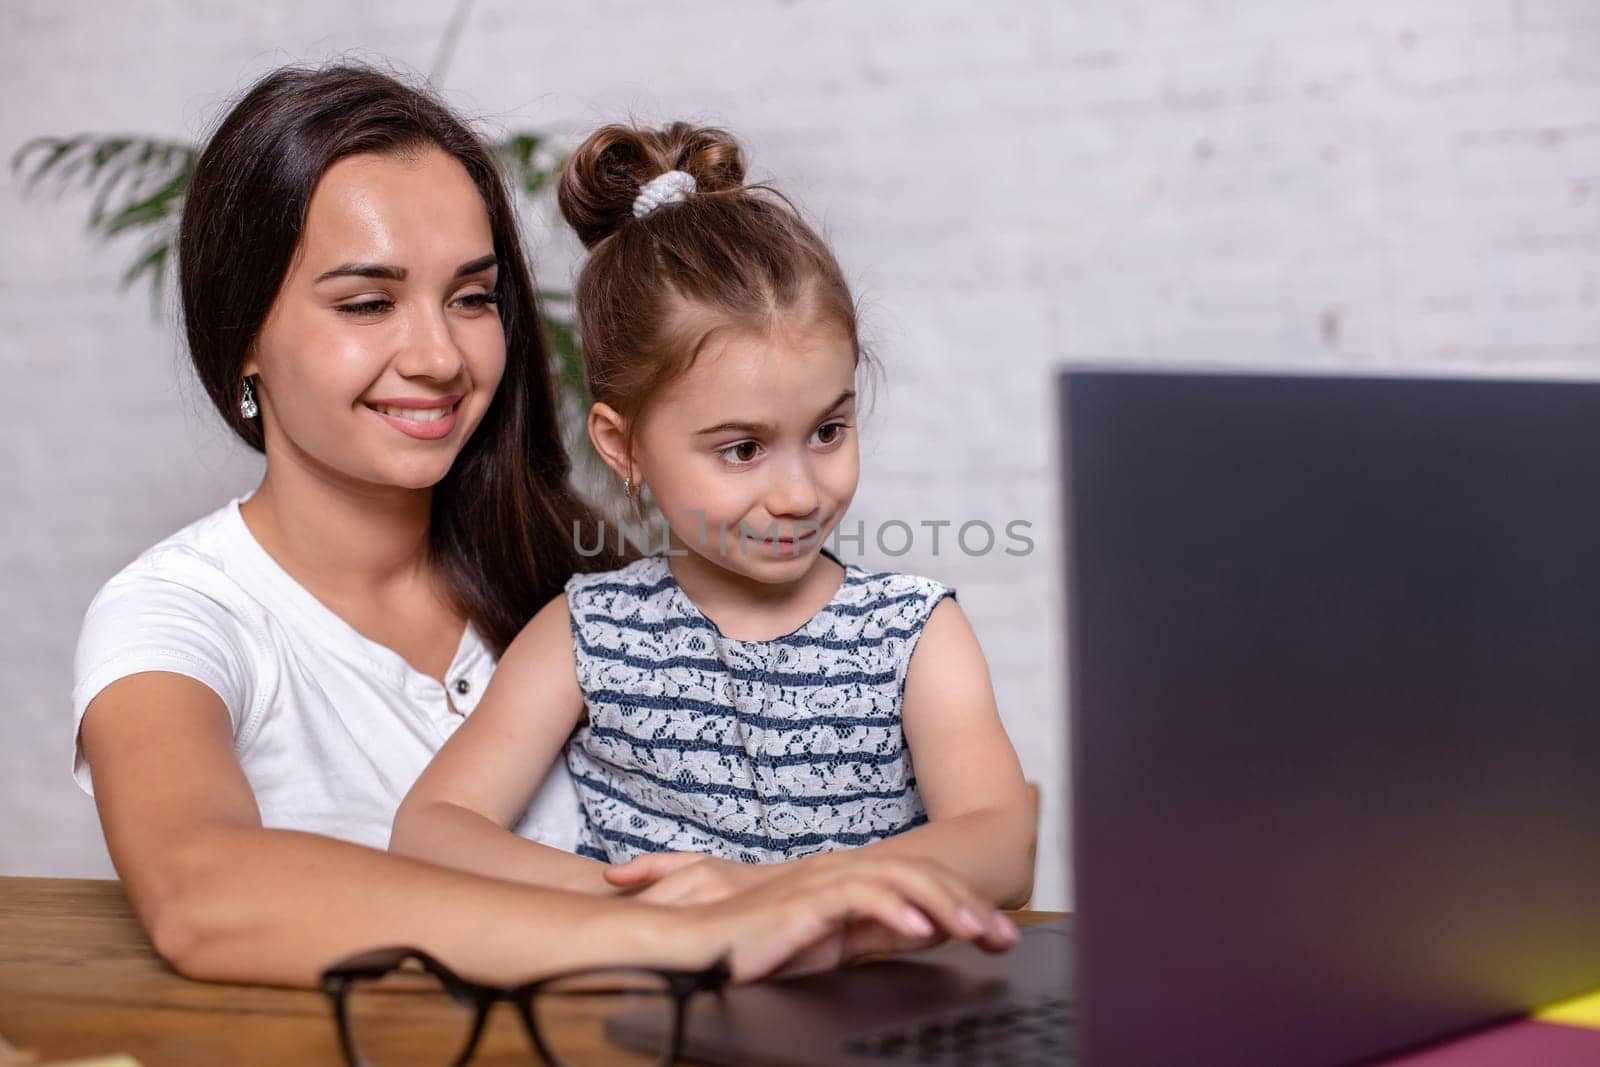 Attractive young woman and her little cute daughter are sitting at the table and having fun while doing homework together. Mother helps daughter with her school classes.